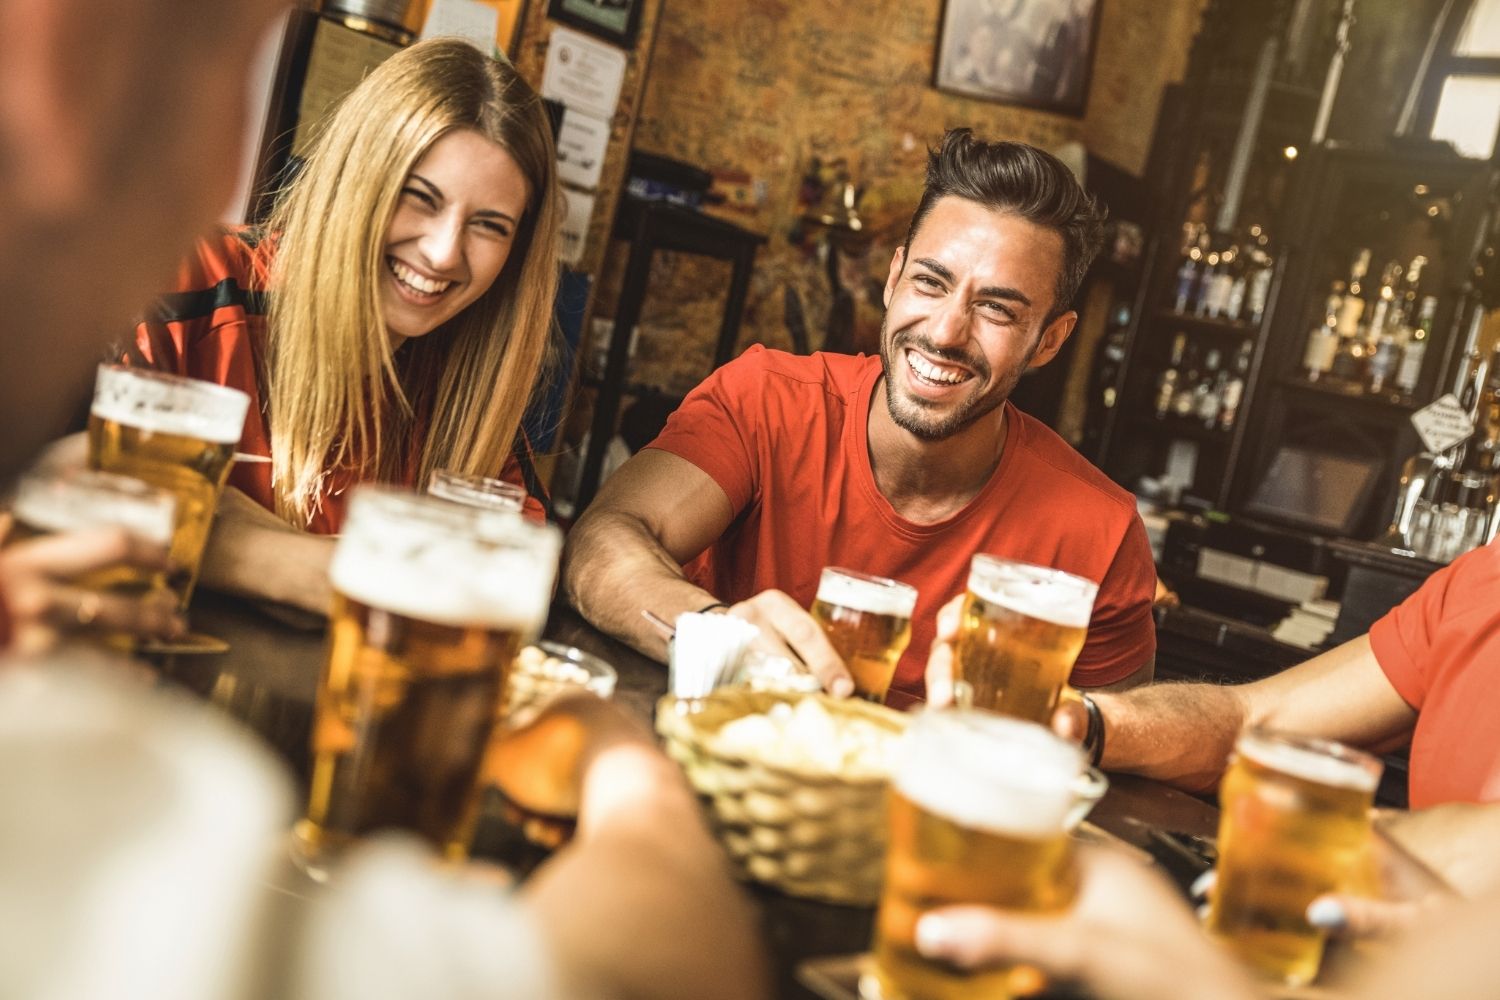 Consumers are more confident about visiting pubs and bars thumbnail